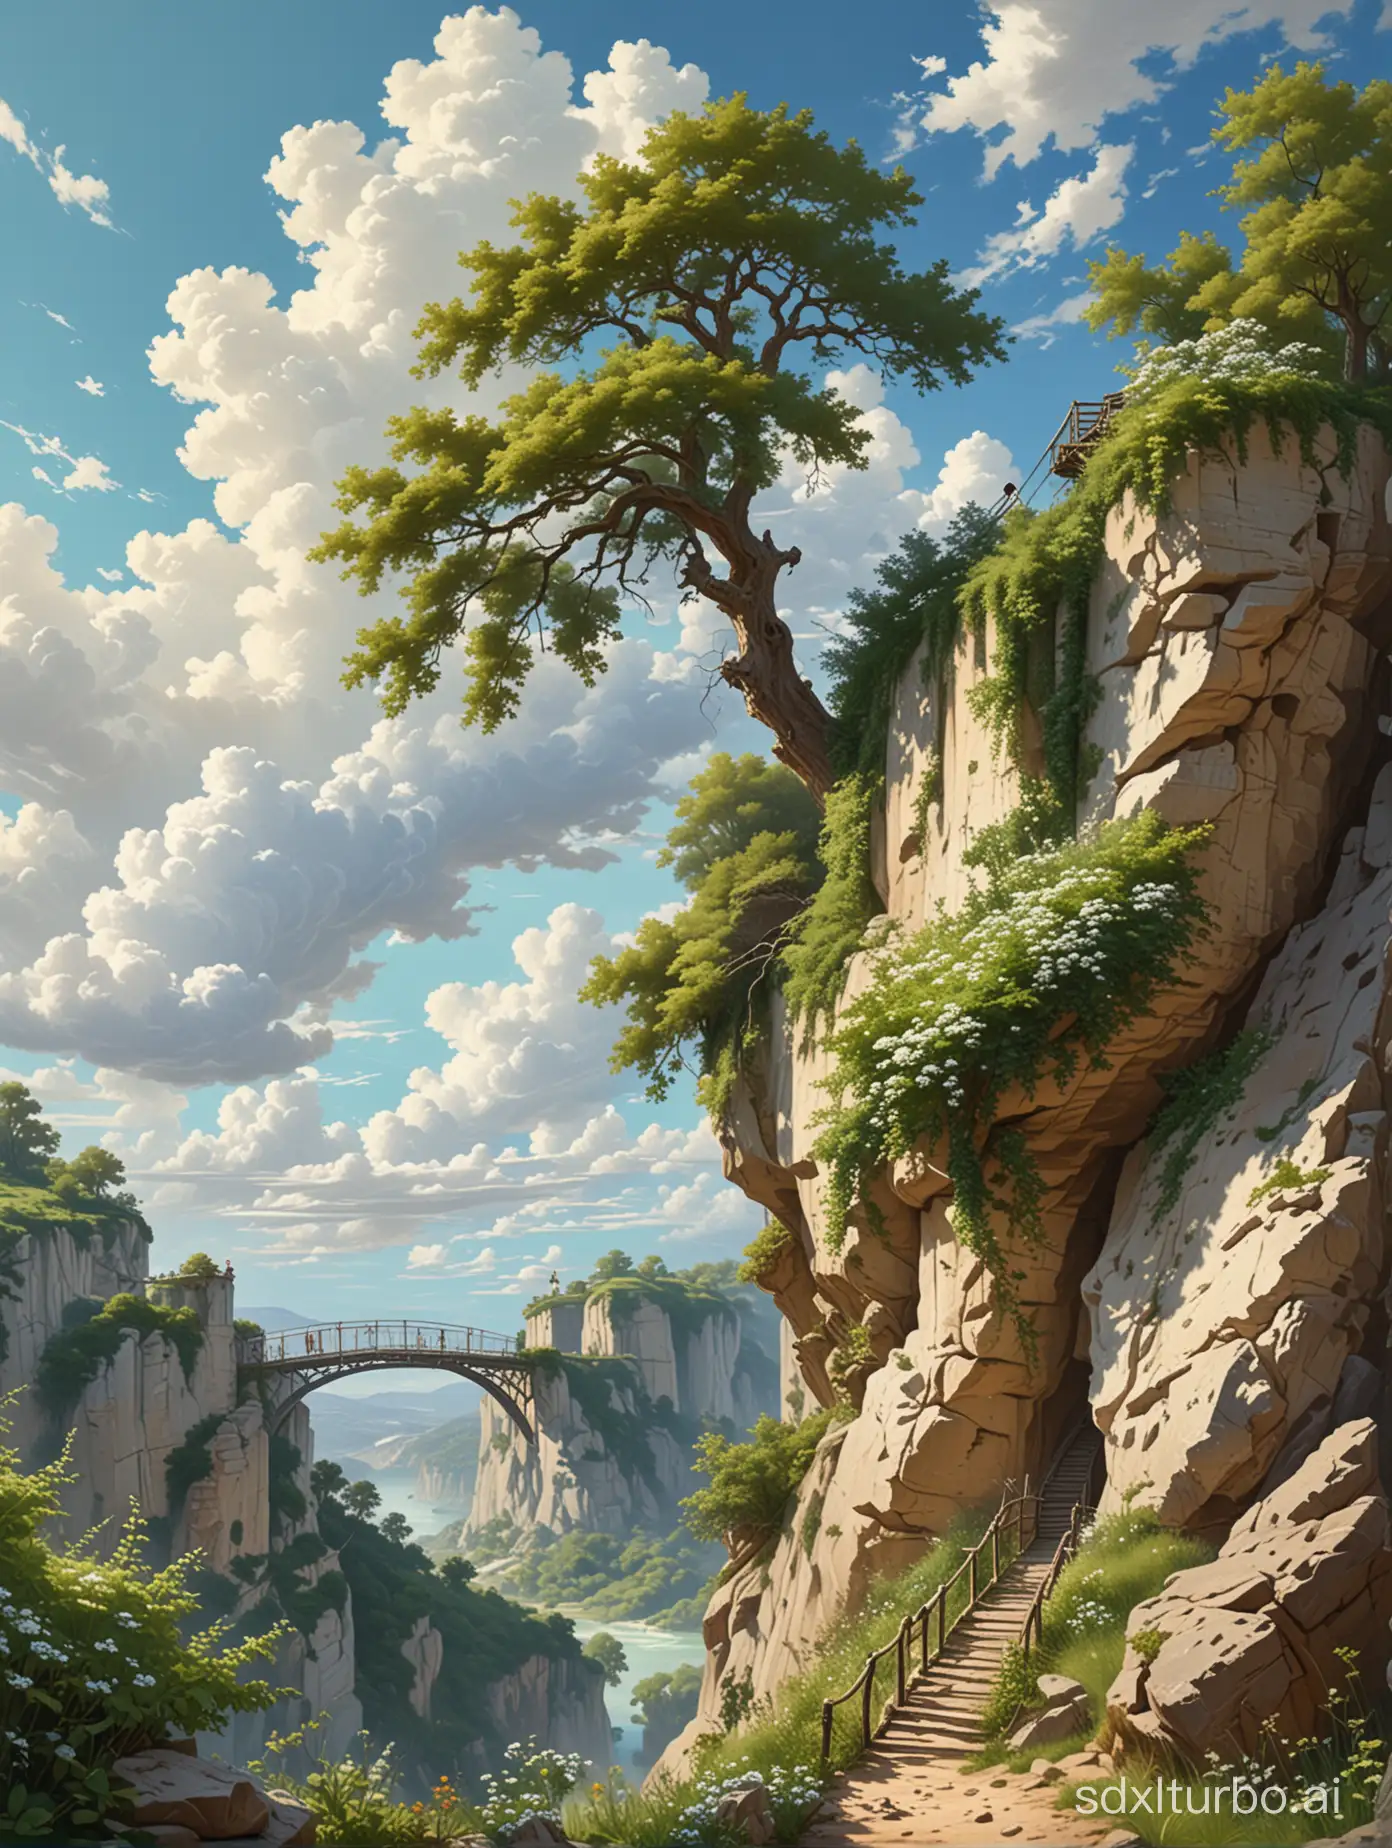 Ultrarealistic painting in the style of Carl Spitzweg, a high cliff,on top of it is a huge oak tree with a mint green leaves,a hanging bridge going to another cliff,grasses,flowers,anime style of fluffy white clouds and blue sky,far angle view